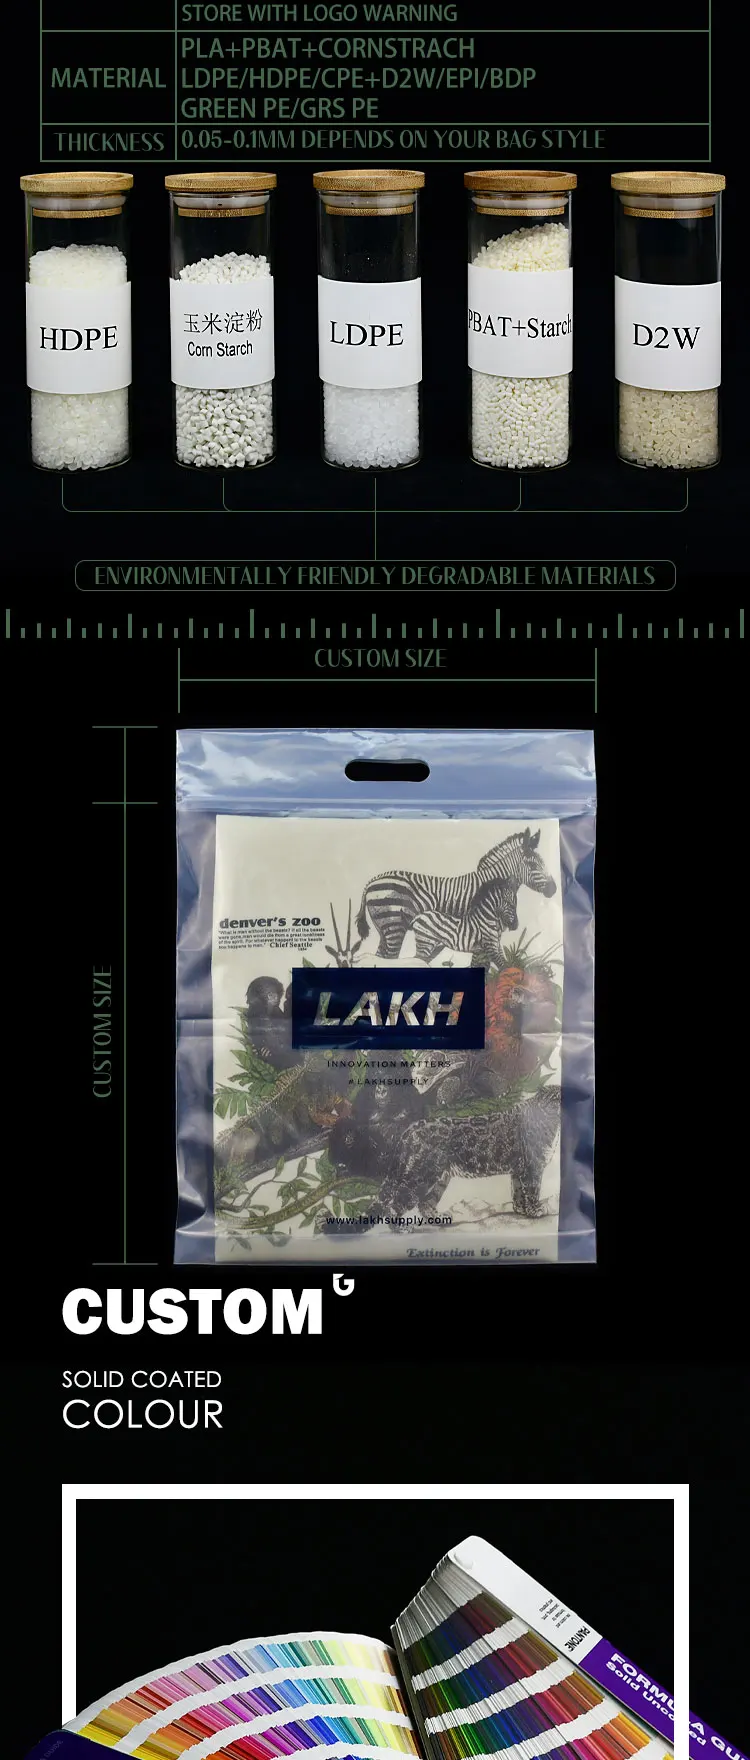 Transparent biodegradable handle  packing custom zip bags plastic bag for clothes with logo warning supplier